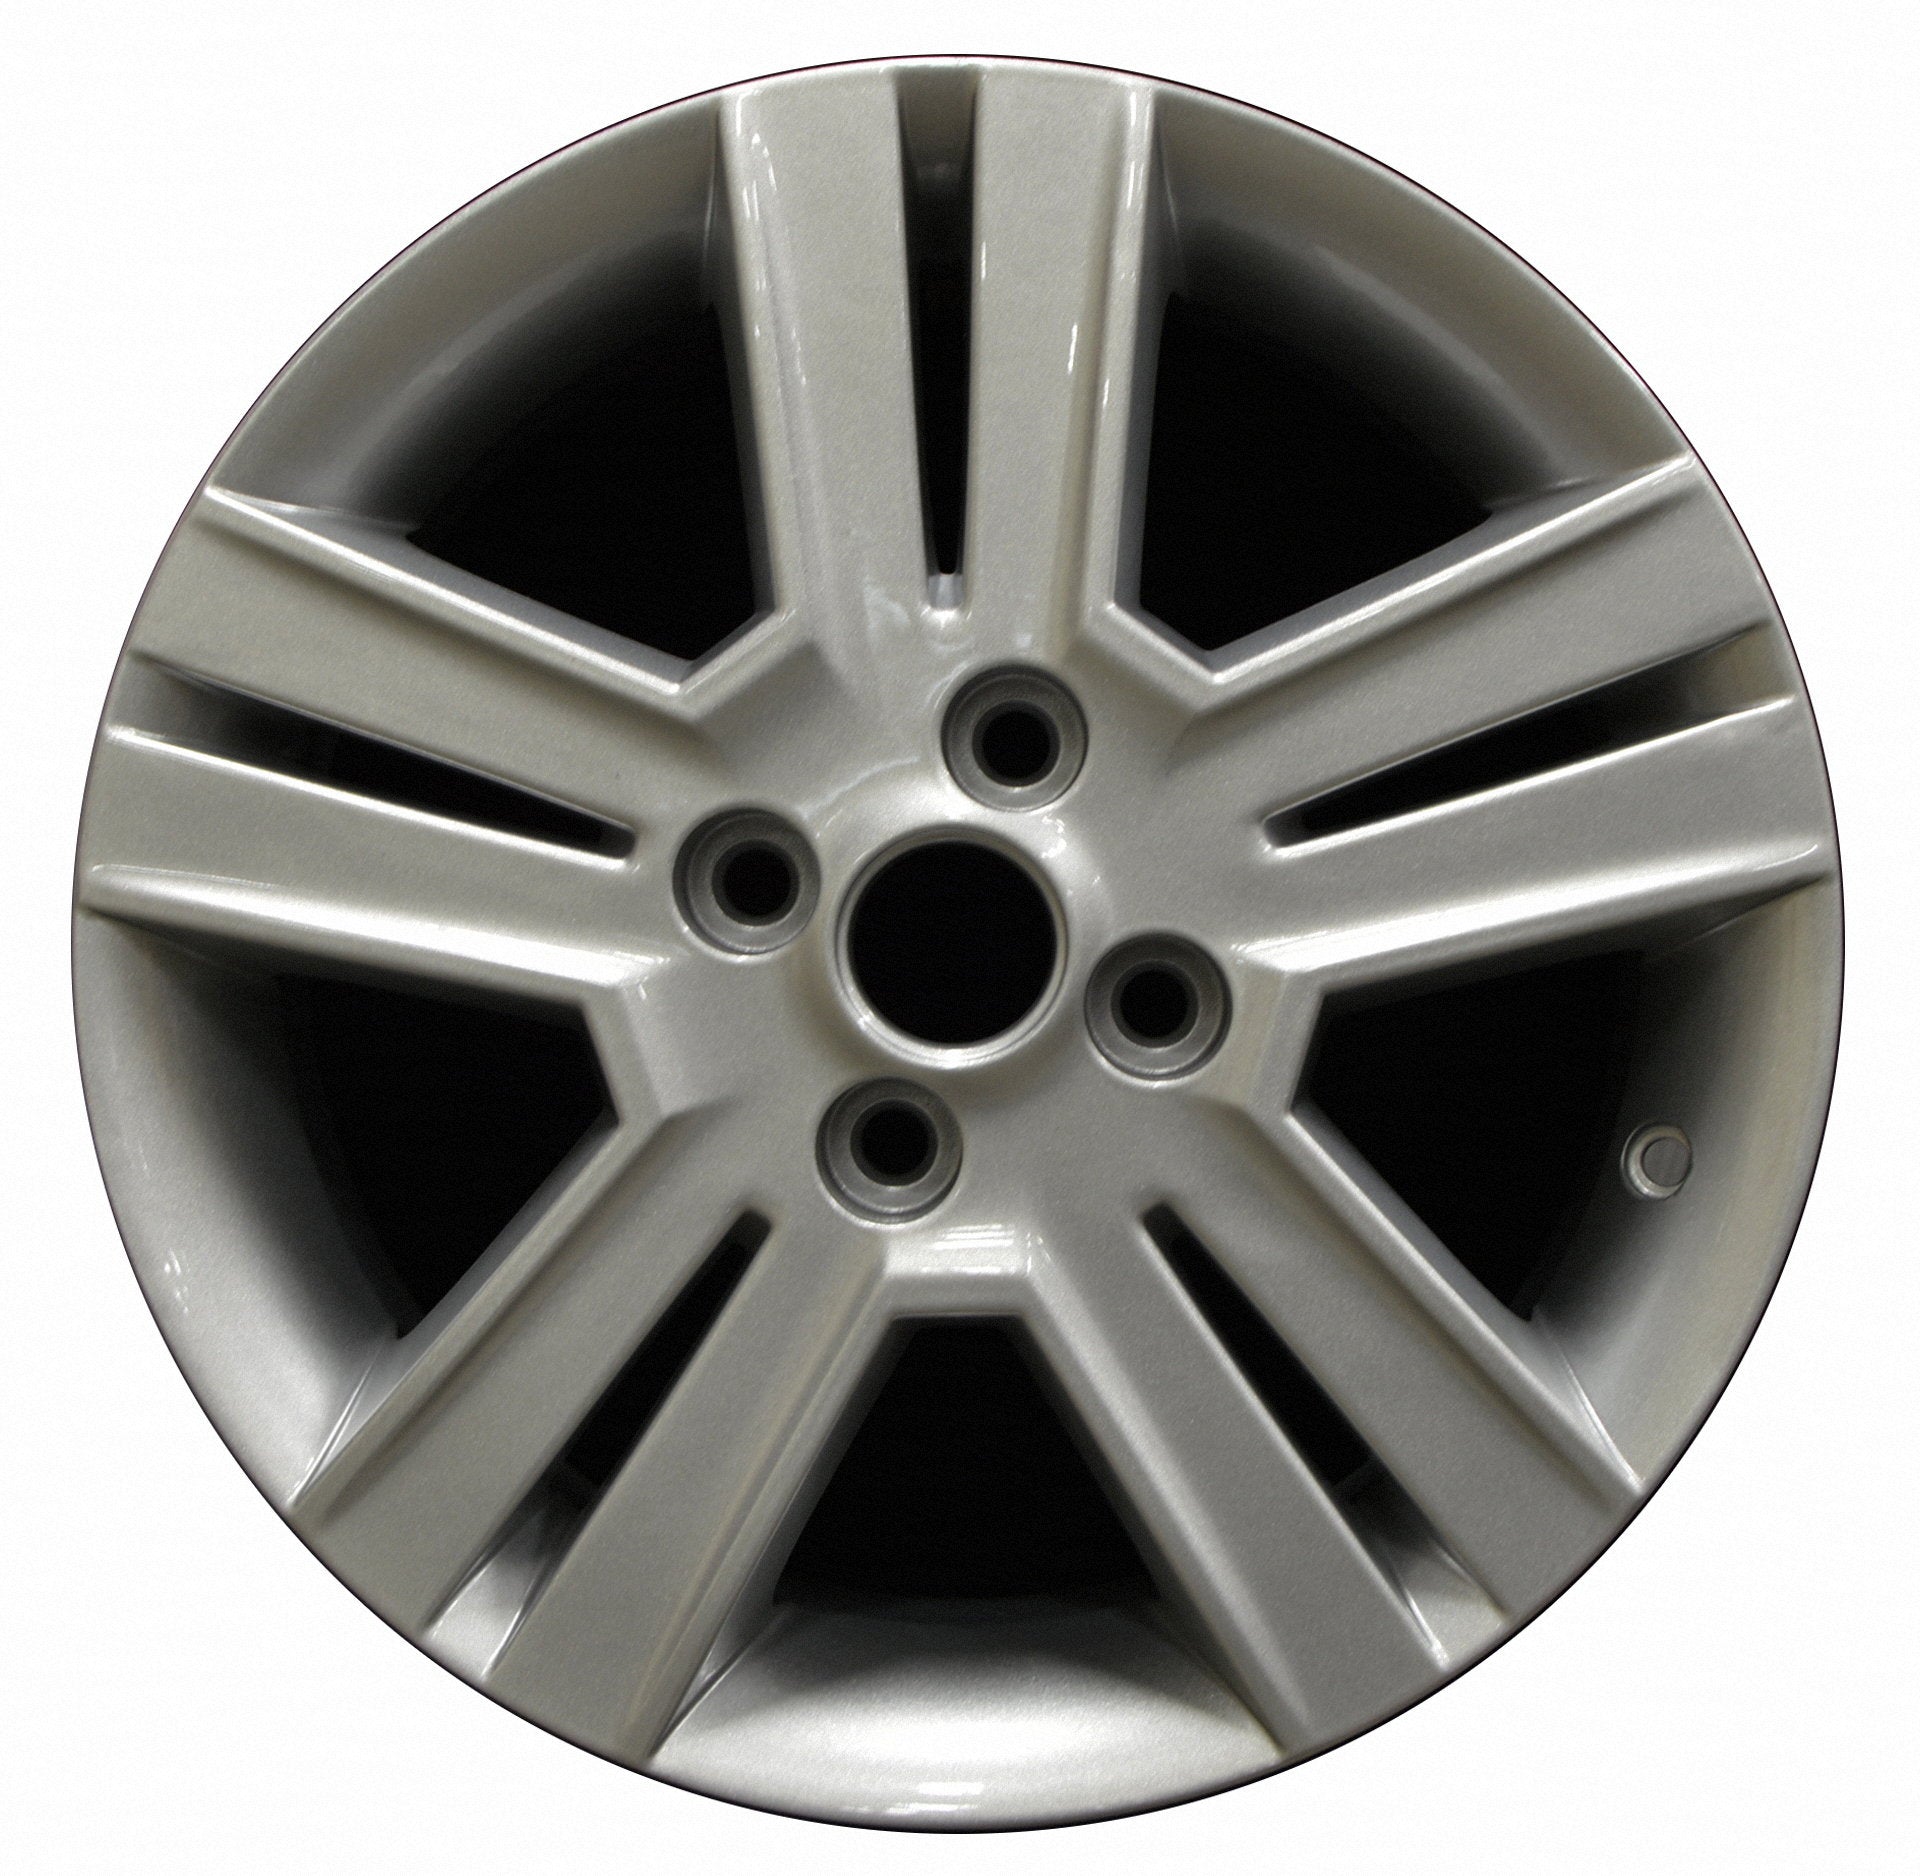 Chevrolet Spark  2013, 2014, 2015 Factory OEM Car Wheel Size 15x6 Alloy WAO.5556.PS13.FF